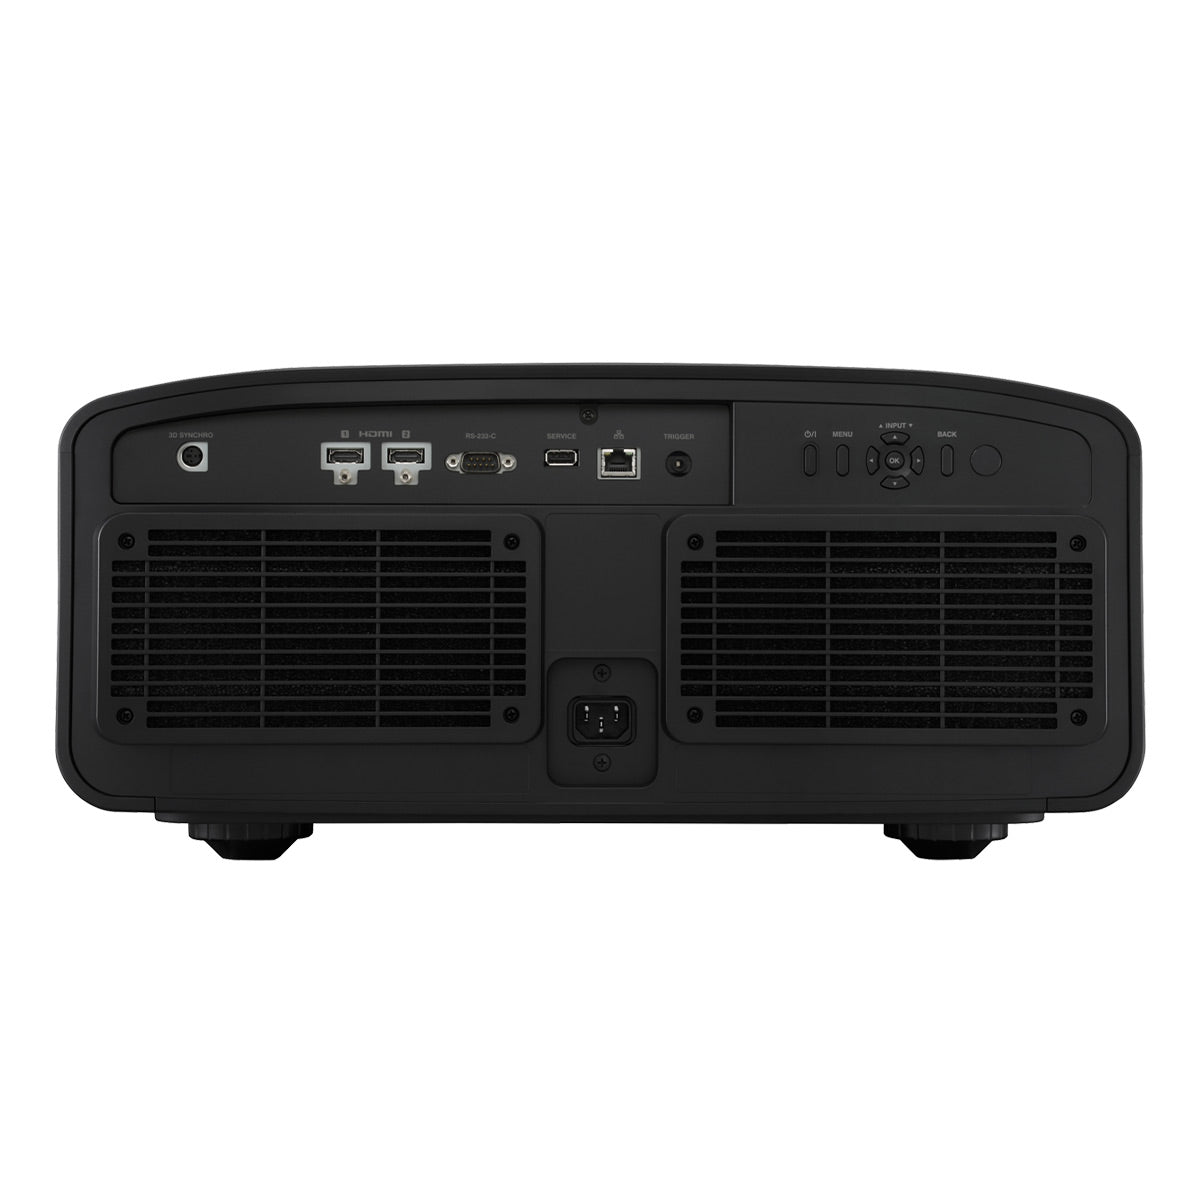 JVC DLA-NZ800 D-ILA Laser 8K Home Theater and Gaming Projector